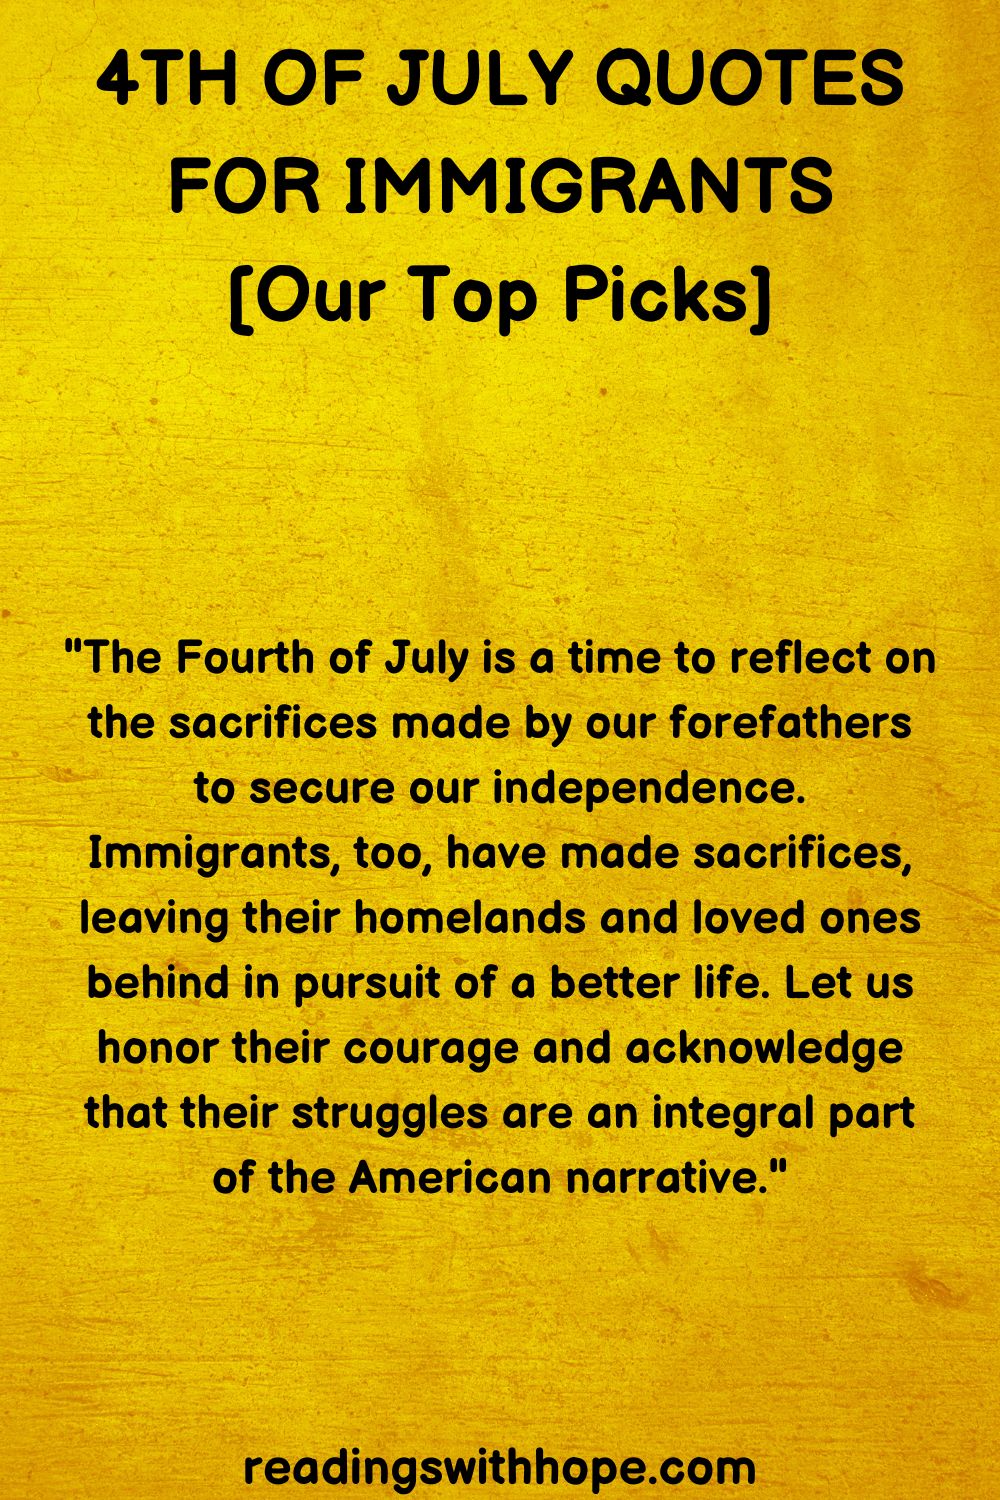 4th of July Quotes For Immigrants